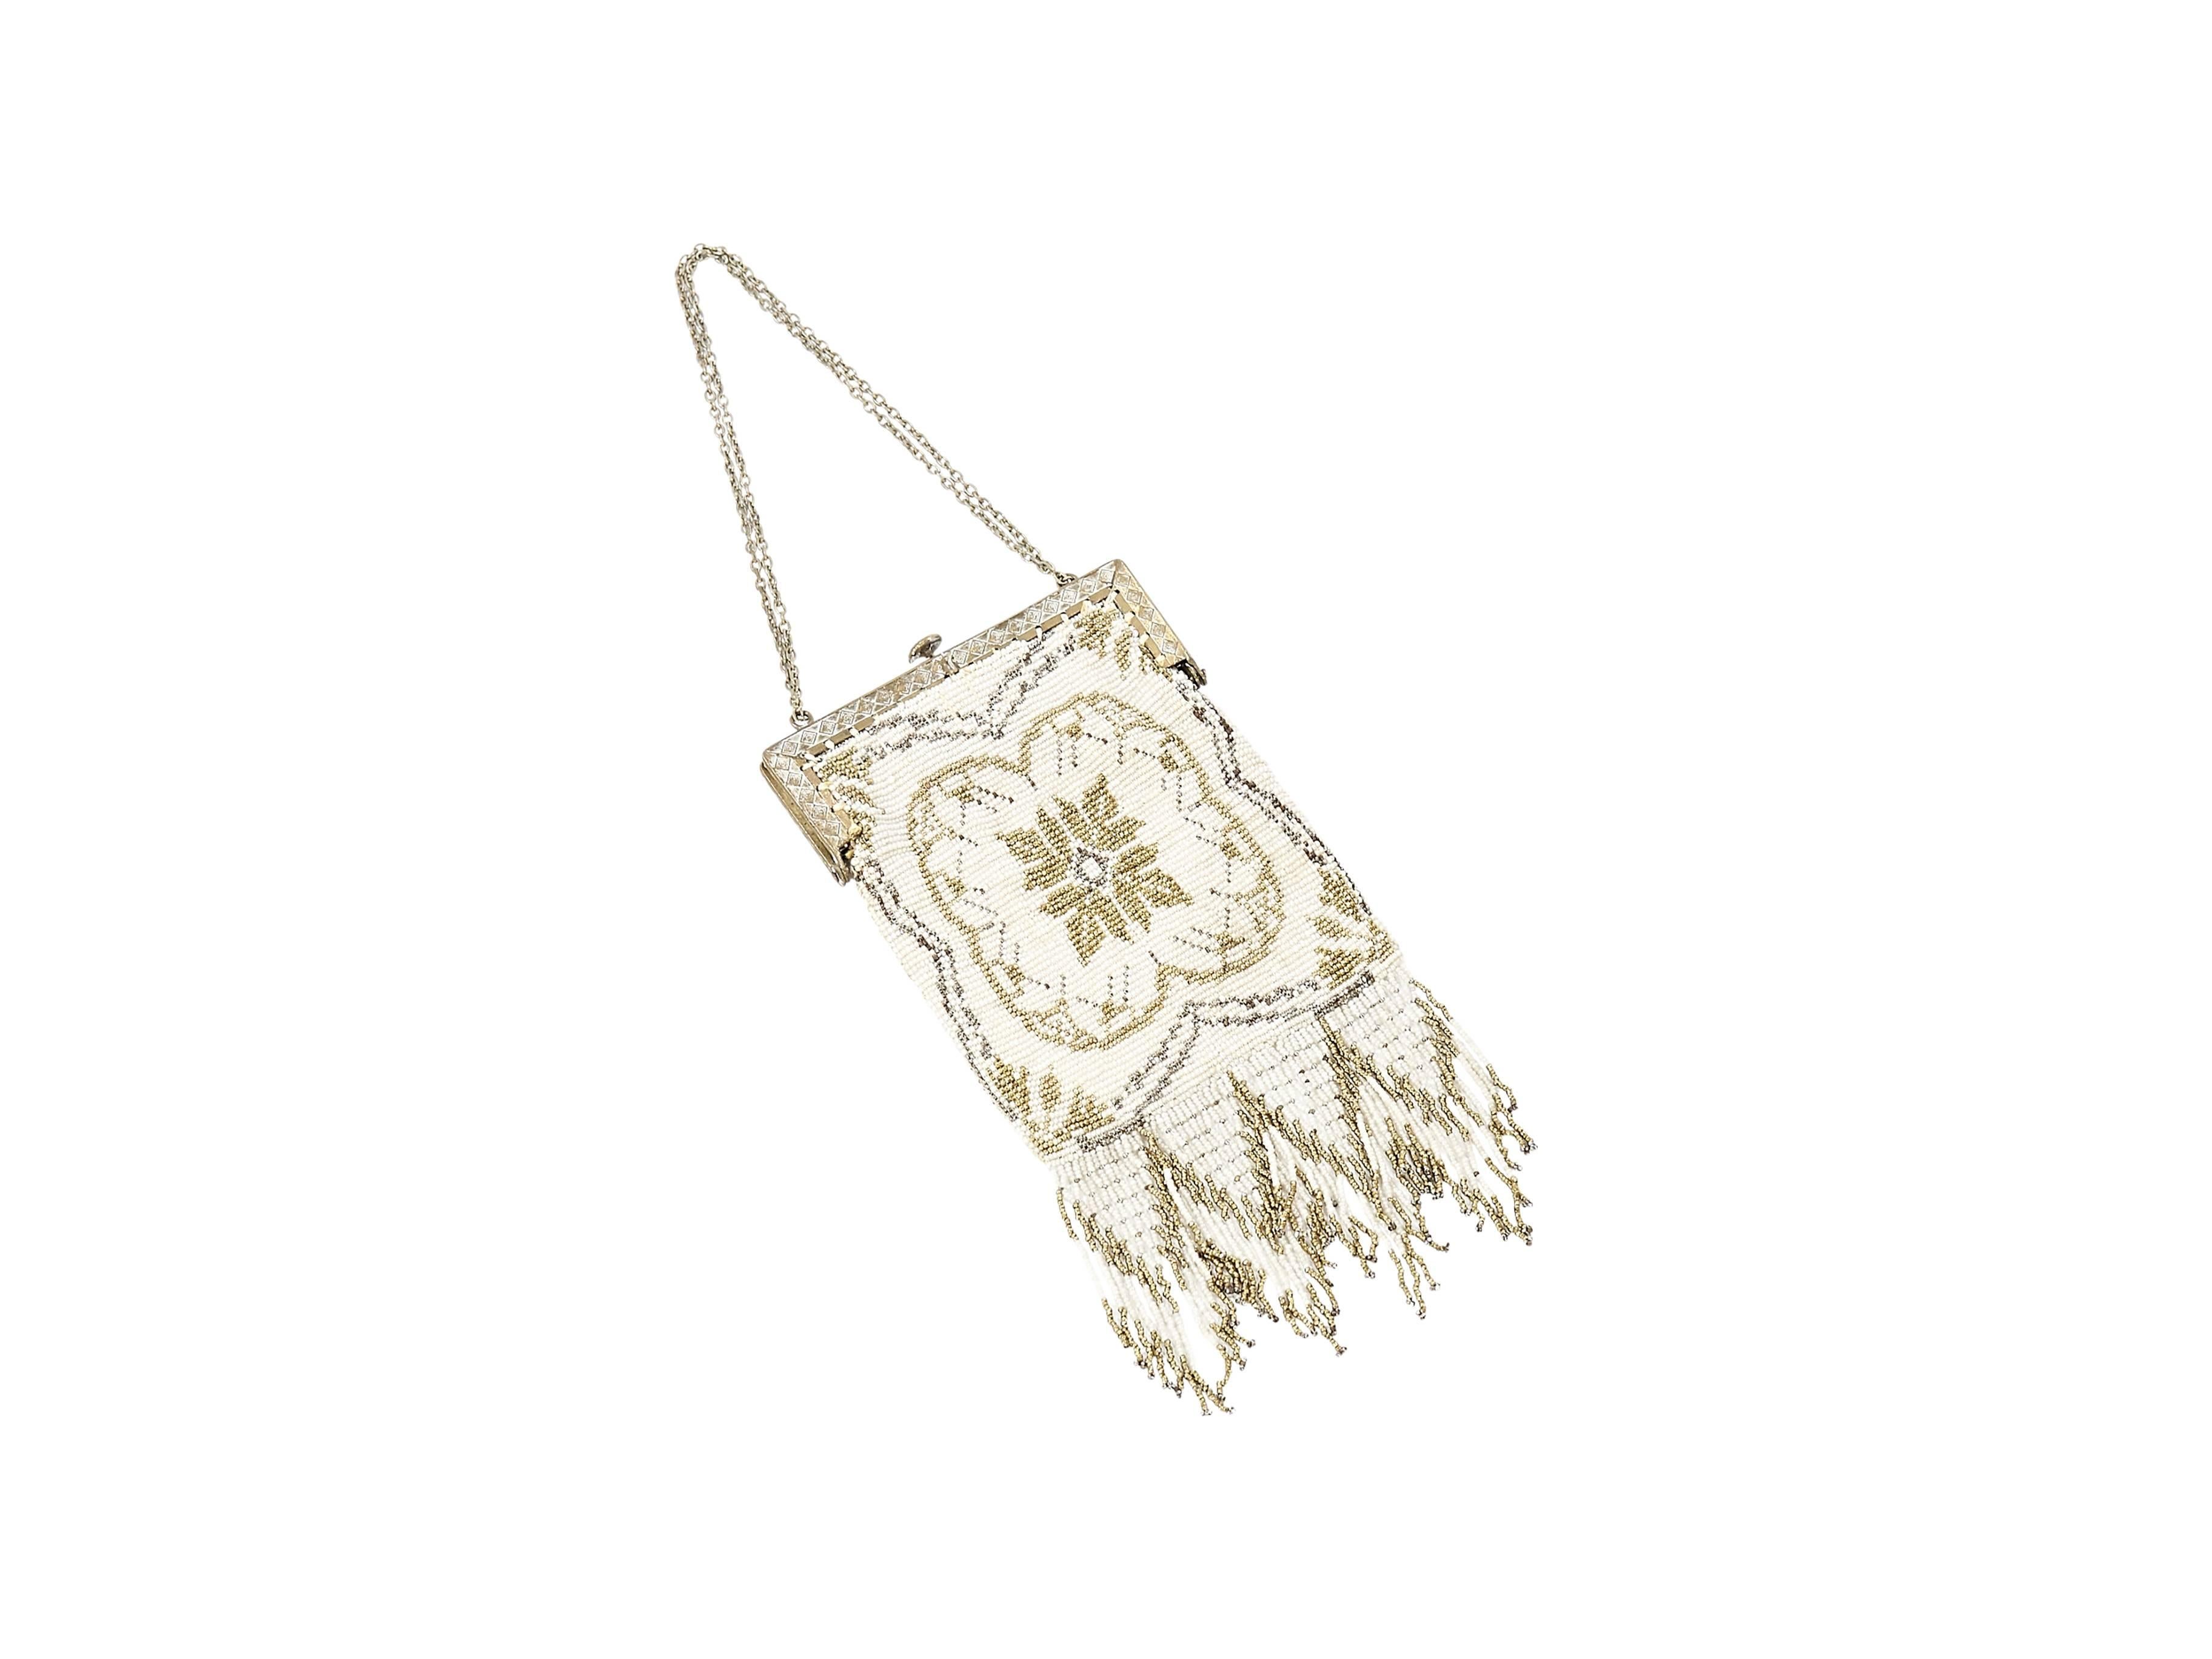 Product details:  Intricate ivory, gold and silver beaded vintage clutch by Whiting & Davis.  Circa 1920s.  Tuck-away chain strap.  Top push-lock closure.  Lined interior.  Chevron-like beaded fringe.  4